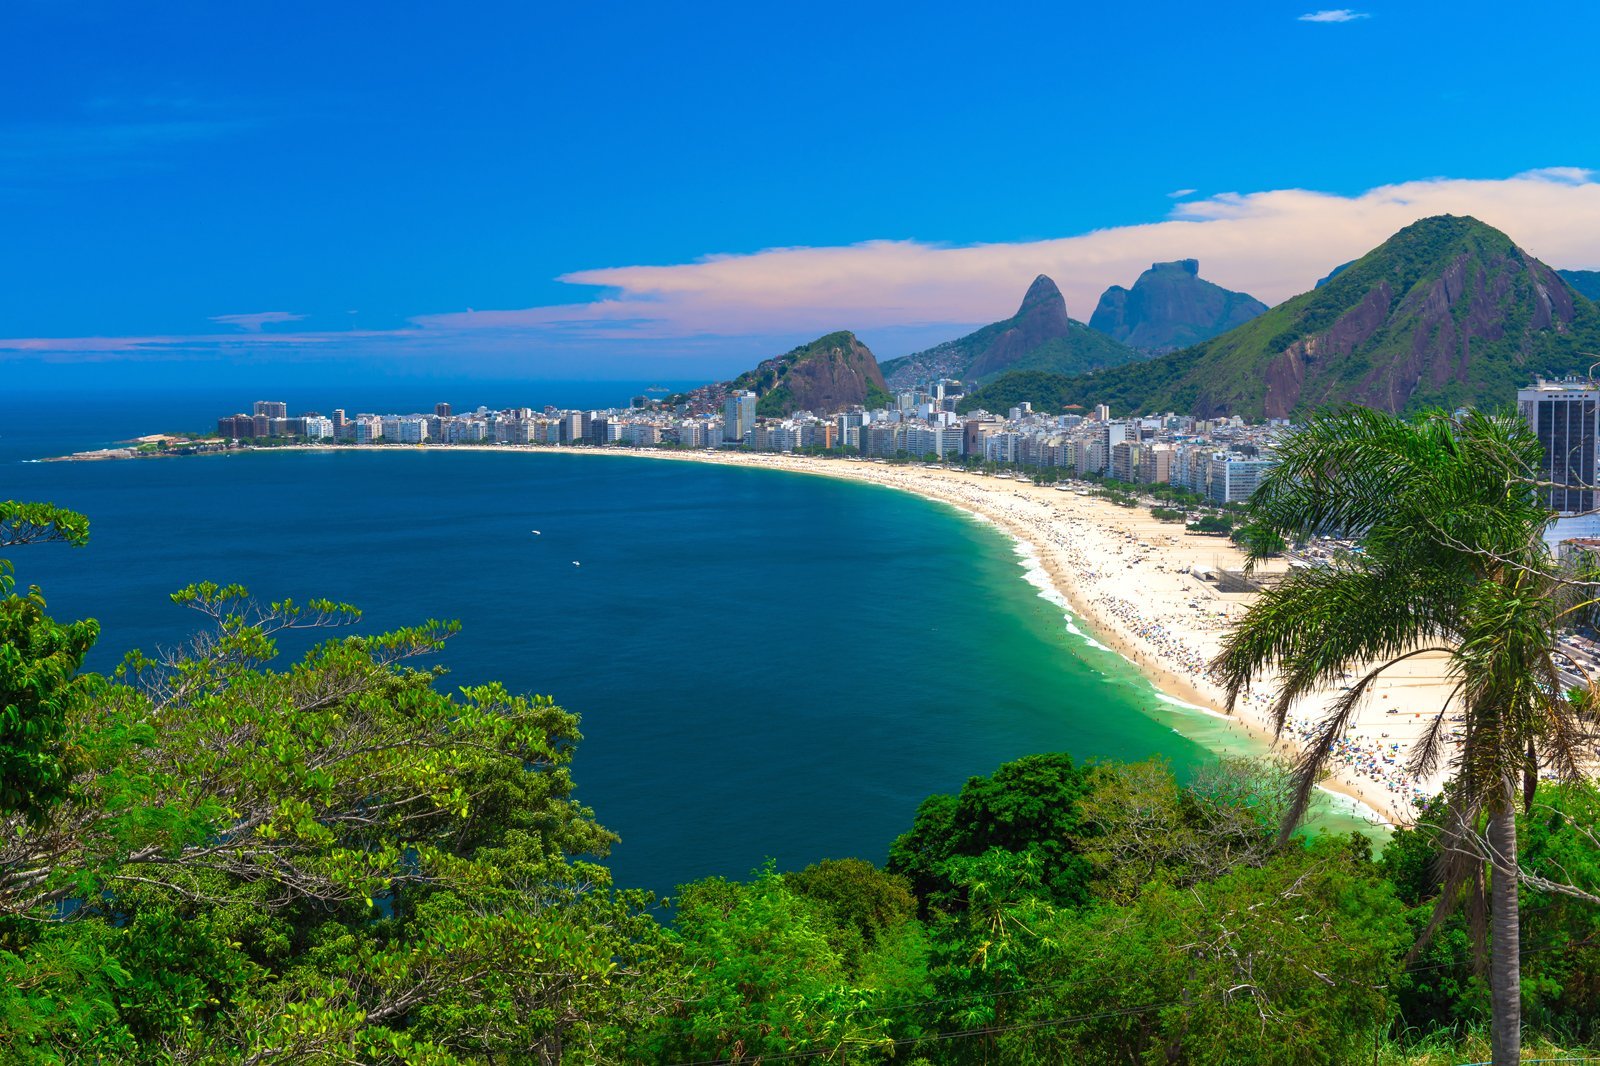 Rio de Janeiro is a vibrant city located in Brazil, known for its beautiful beaches, stunning architecture, and rich culture. The city is a popular tourist destination, attracting millions of visitors each year